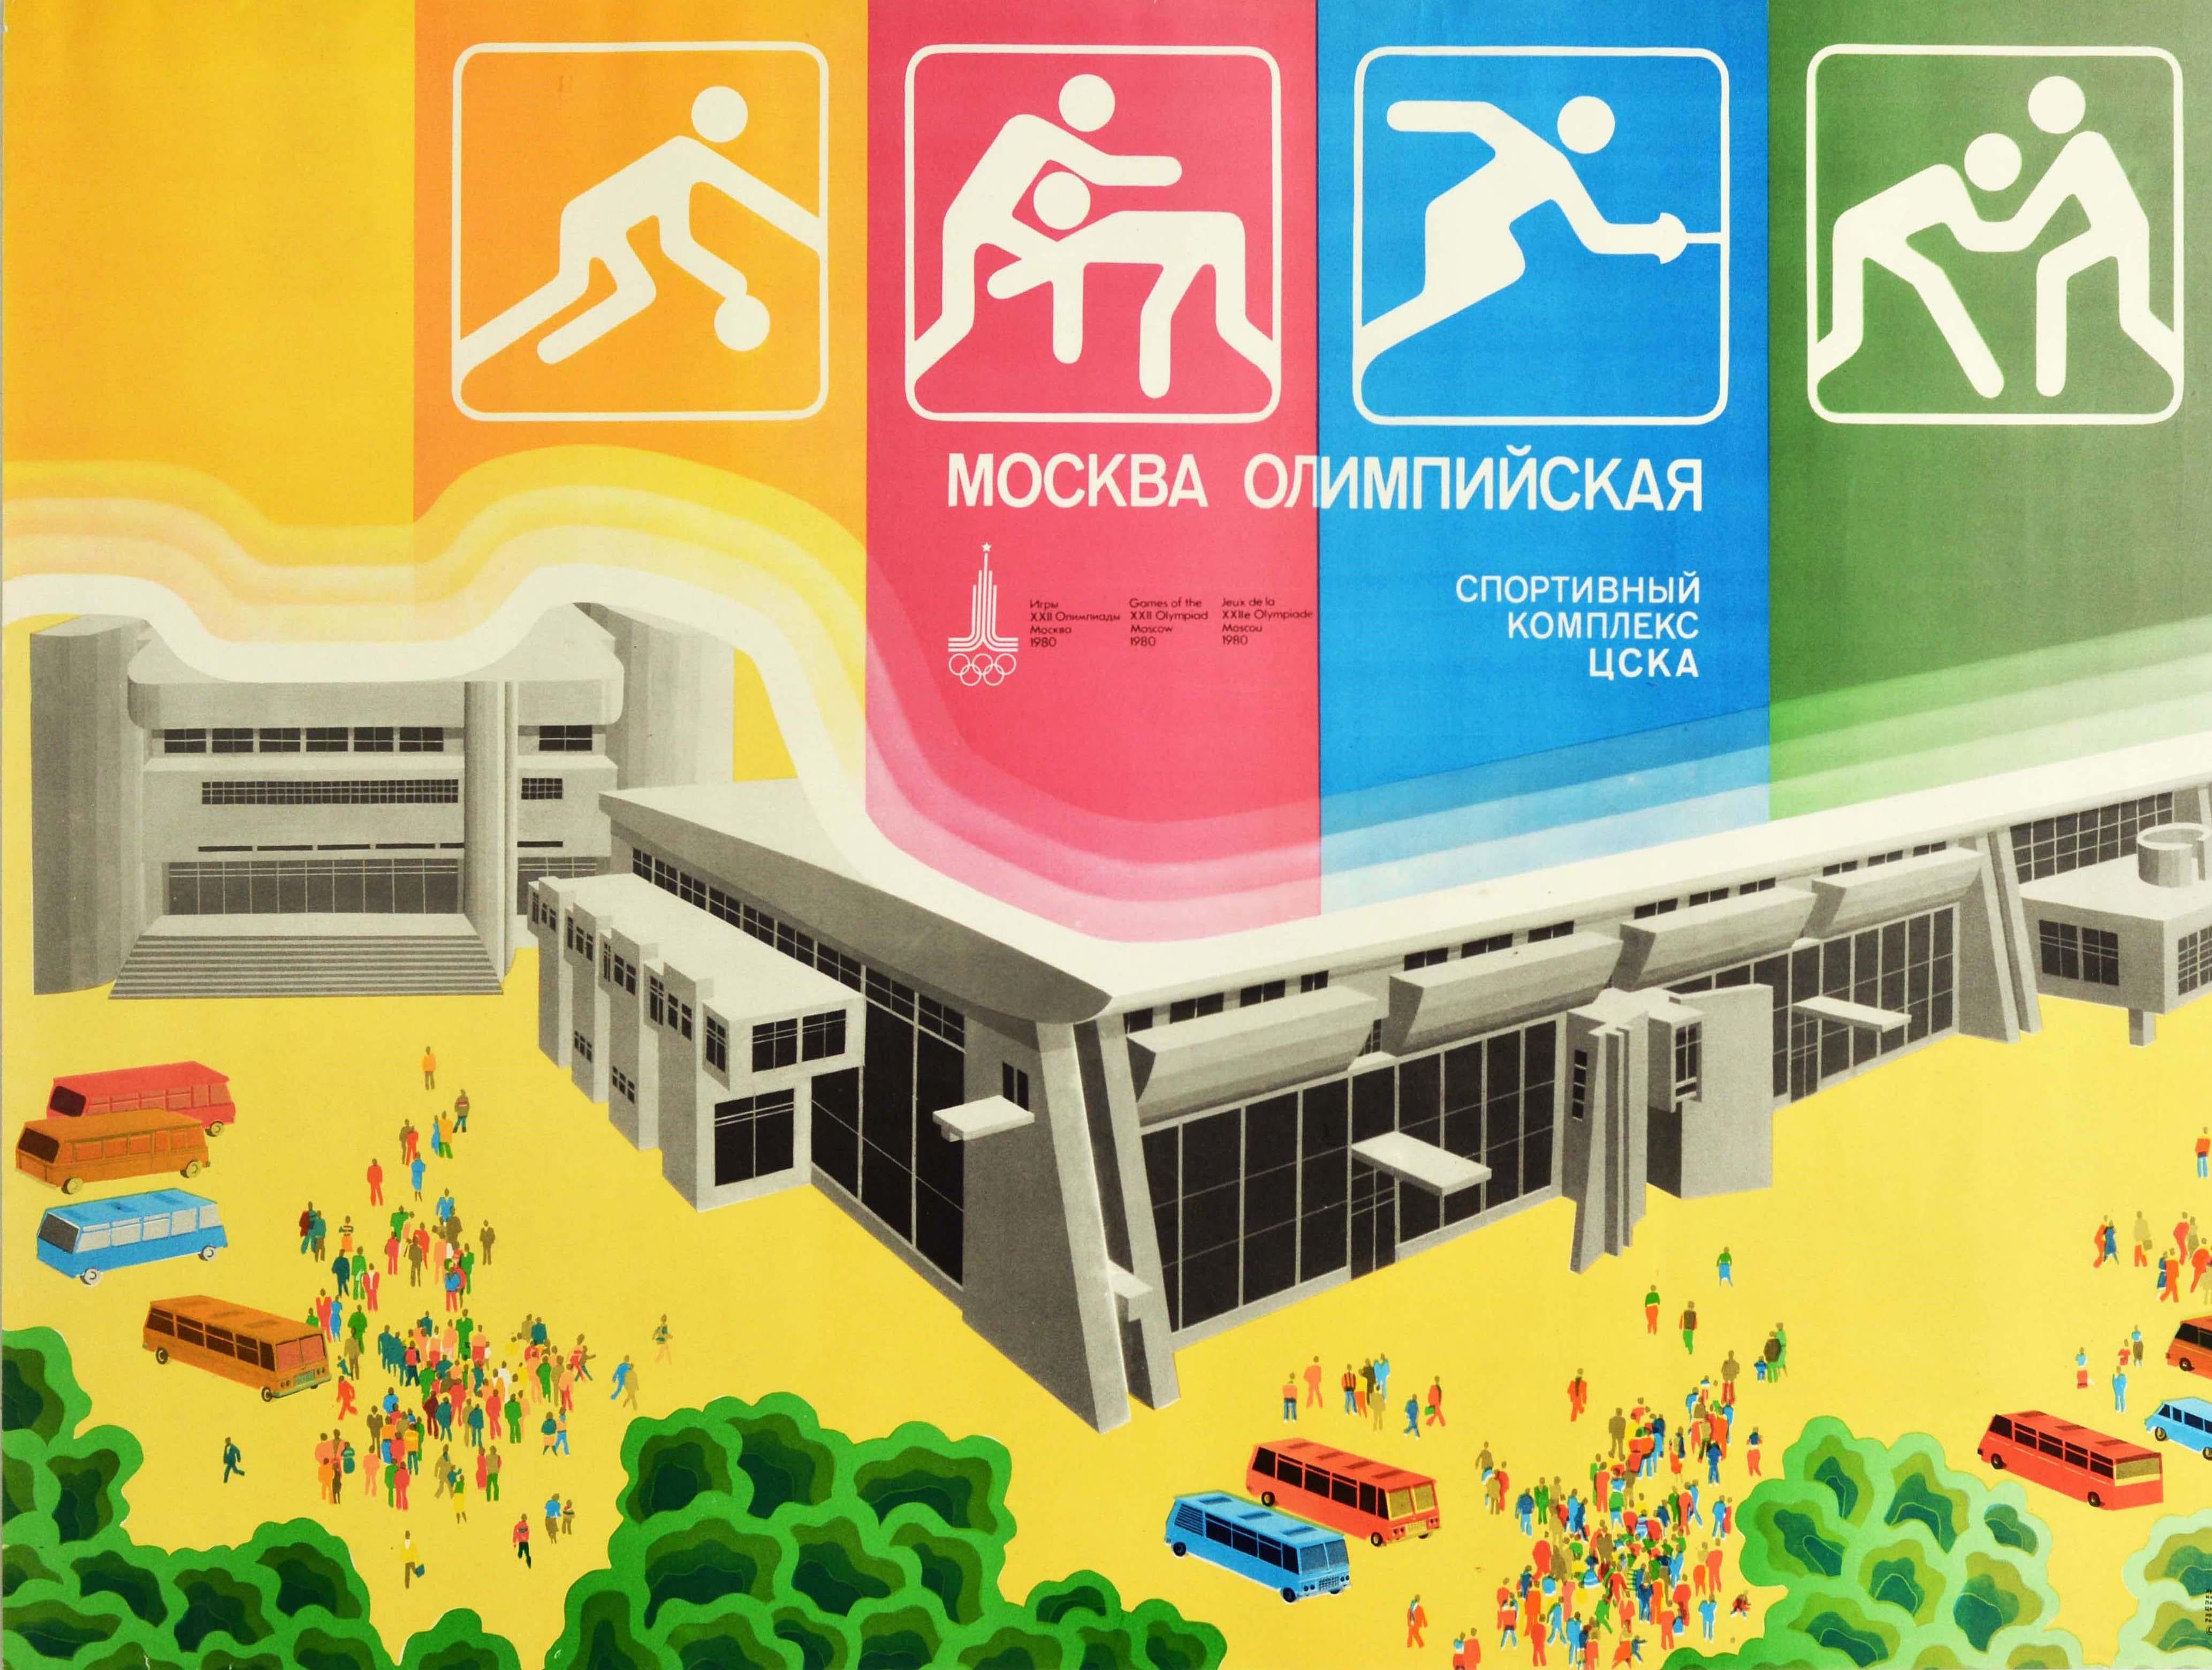 Original vintage 1980 Summer Olympic Games sport poster depicting the newly built Olympic village, the CSKA Central Sports Club of the Army sports complex in Moscow, with silhouettes of people arriving by bus for the Games of the XXII Olympiad held